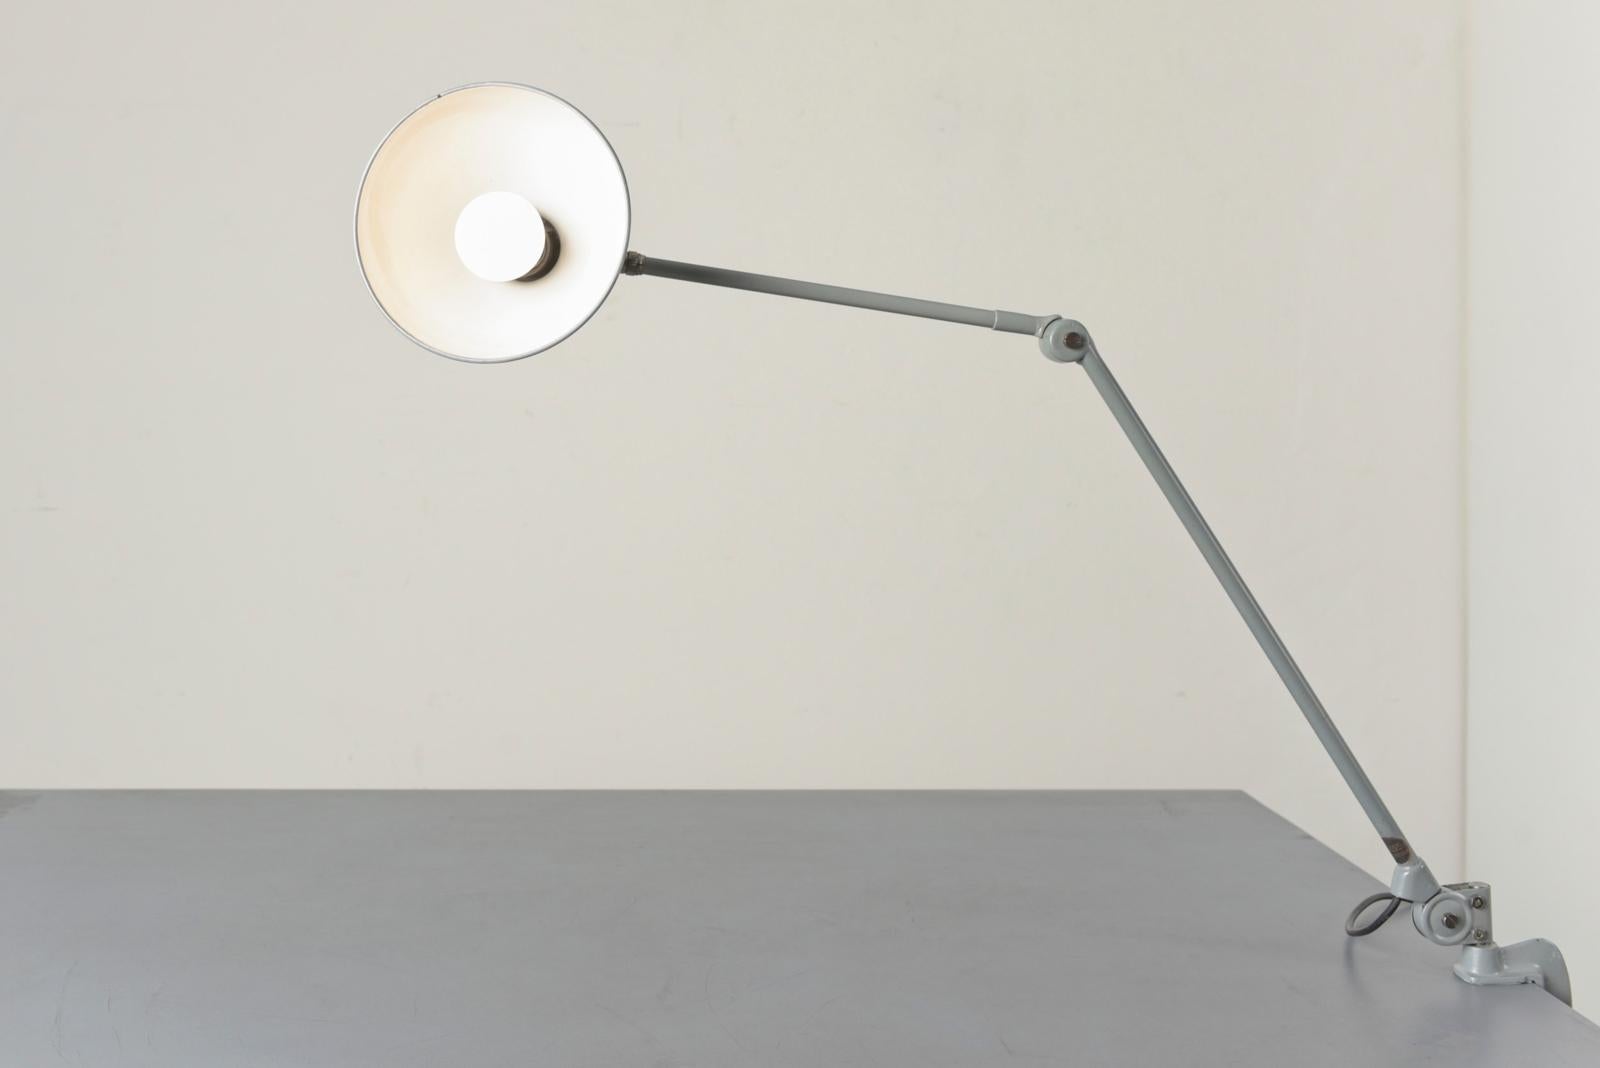 Swiss Table Lamp attr. to Bag Turgi in light grey, Switzerland - 1935 For Sale